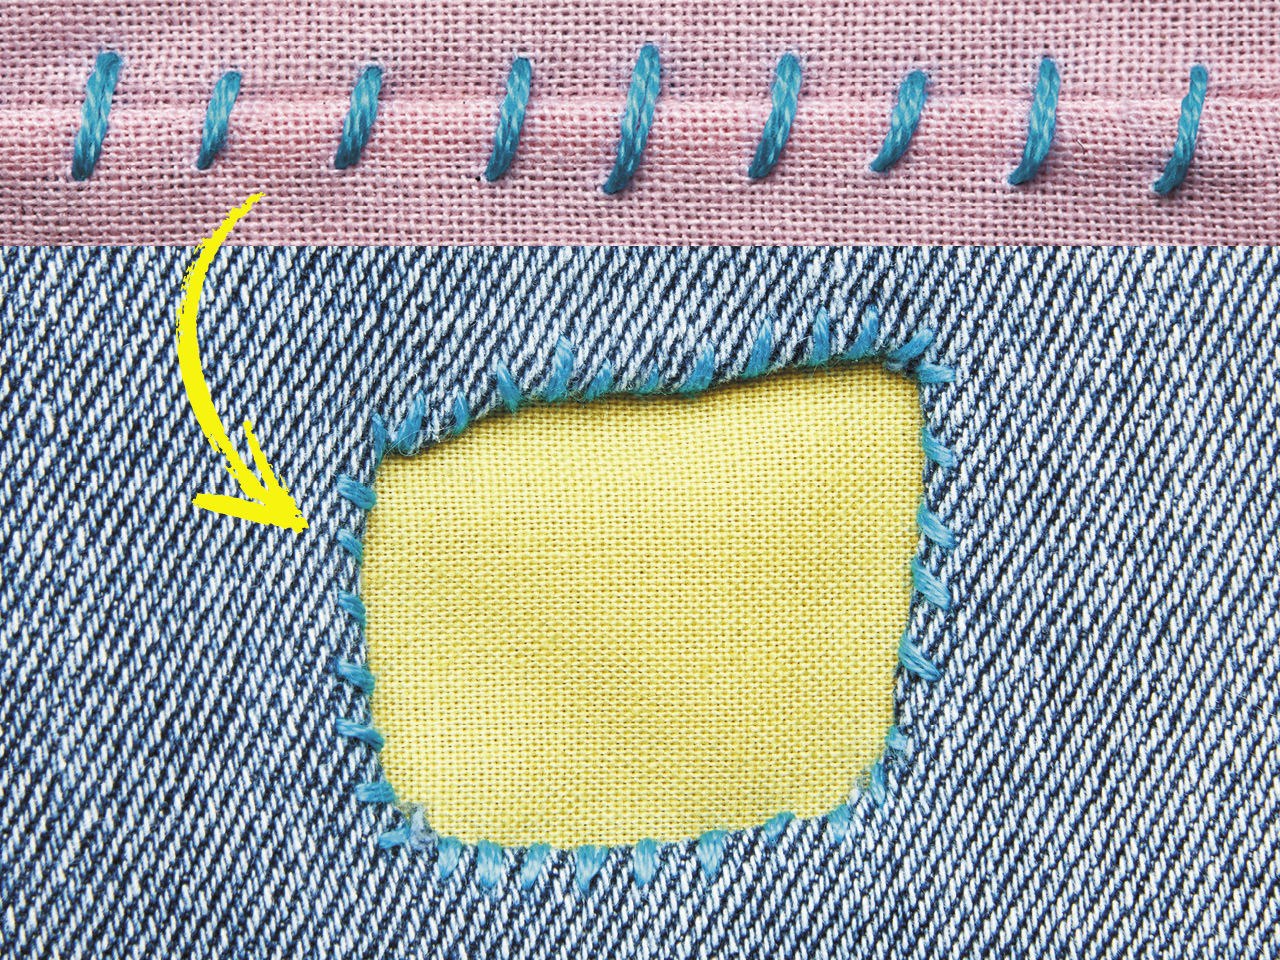 A demonstration of the overlock stitch in blue thread on denim and yellow fabric